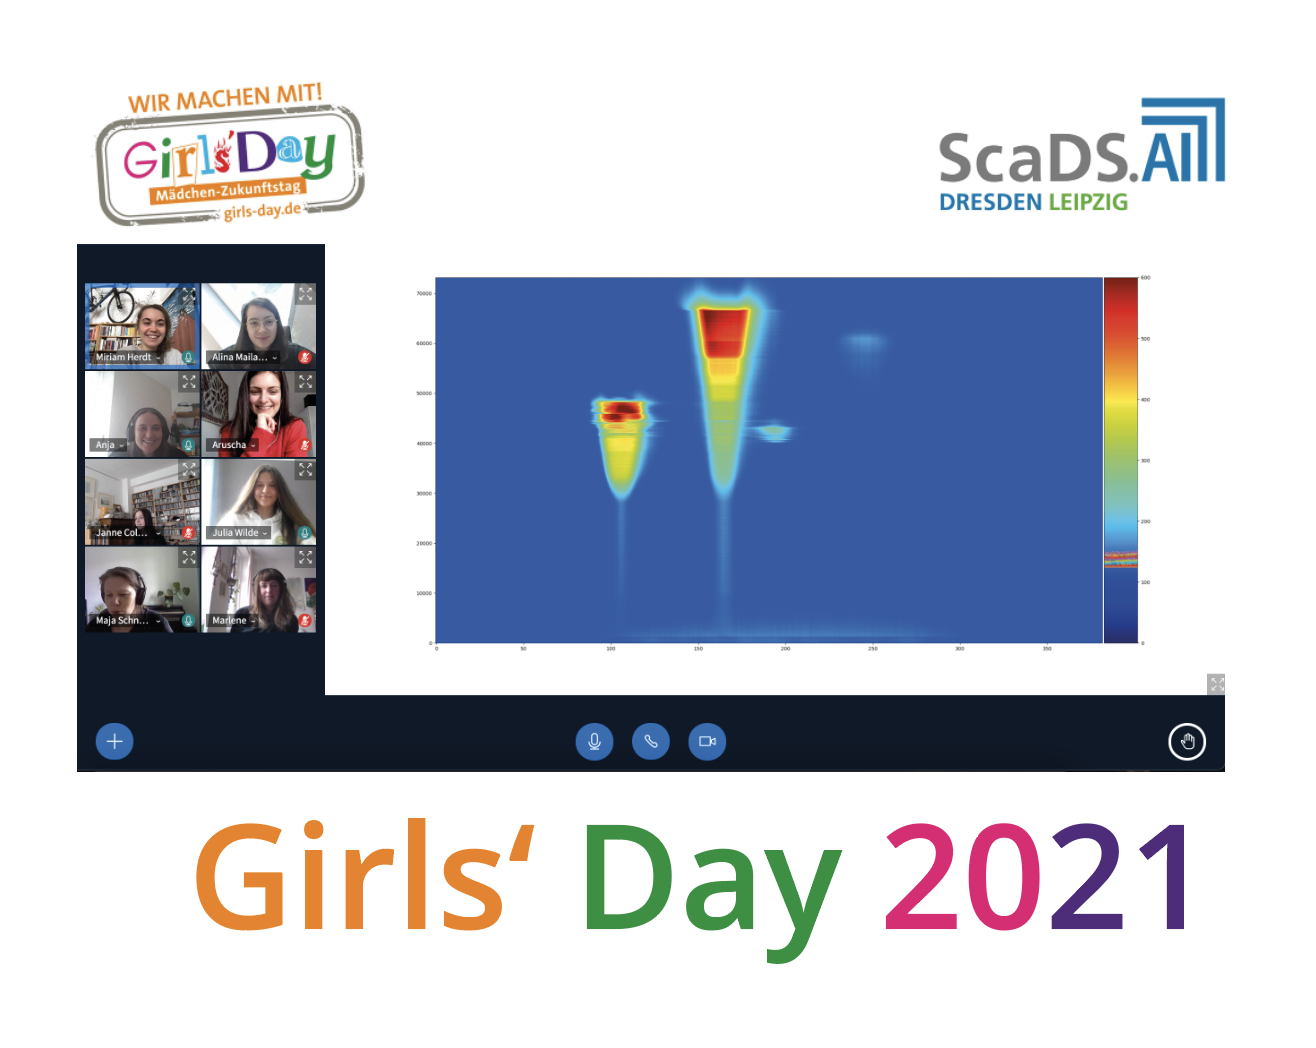 On Girls' Day 2021 we virtually introduced girls to our research.